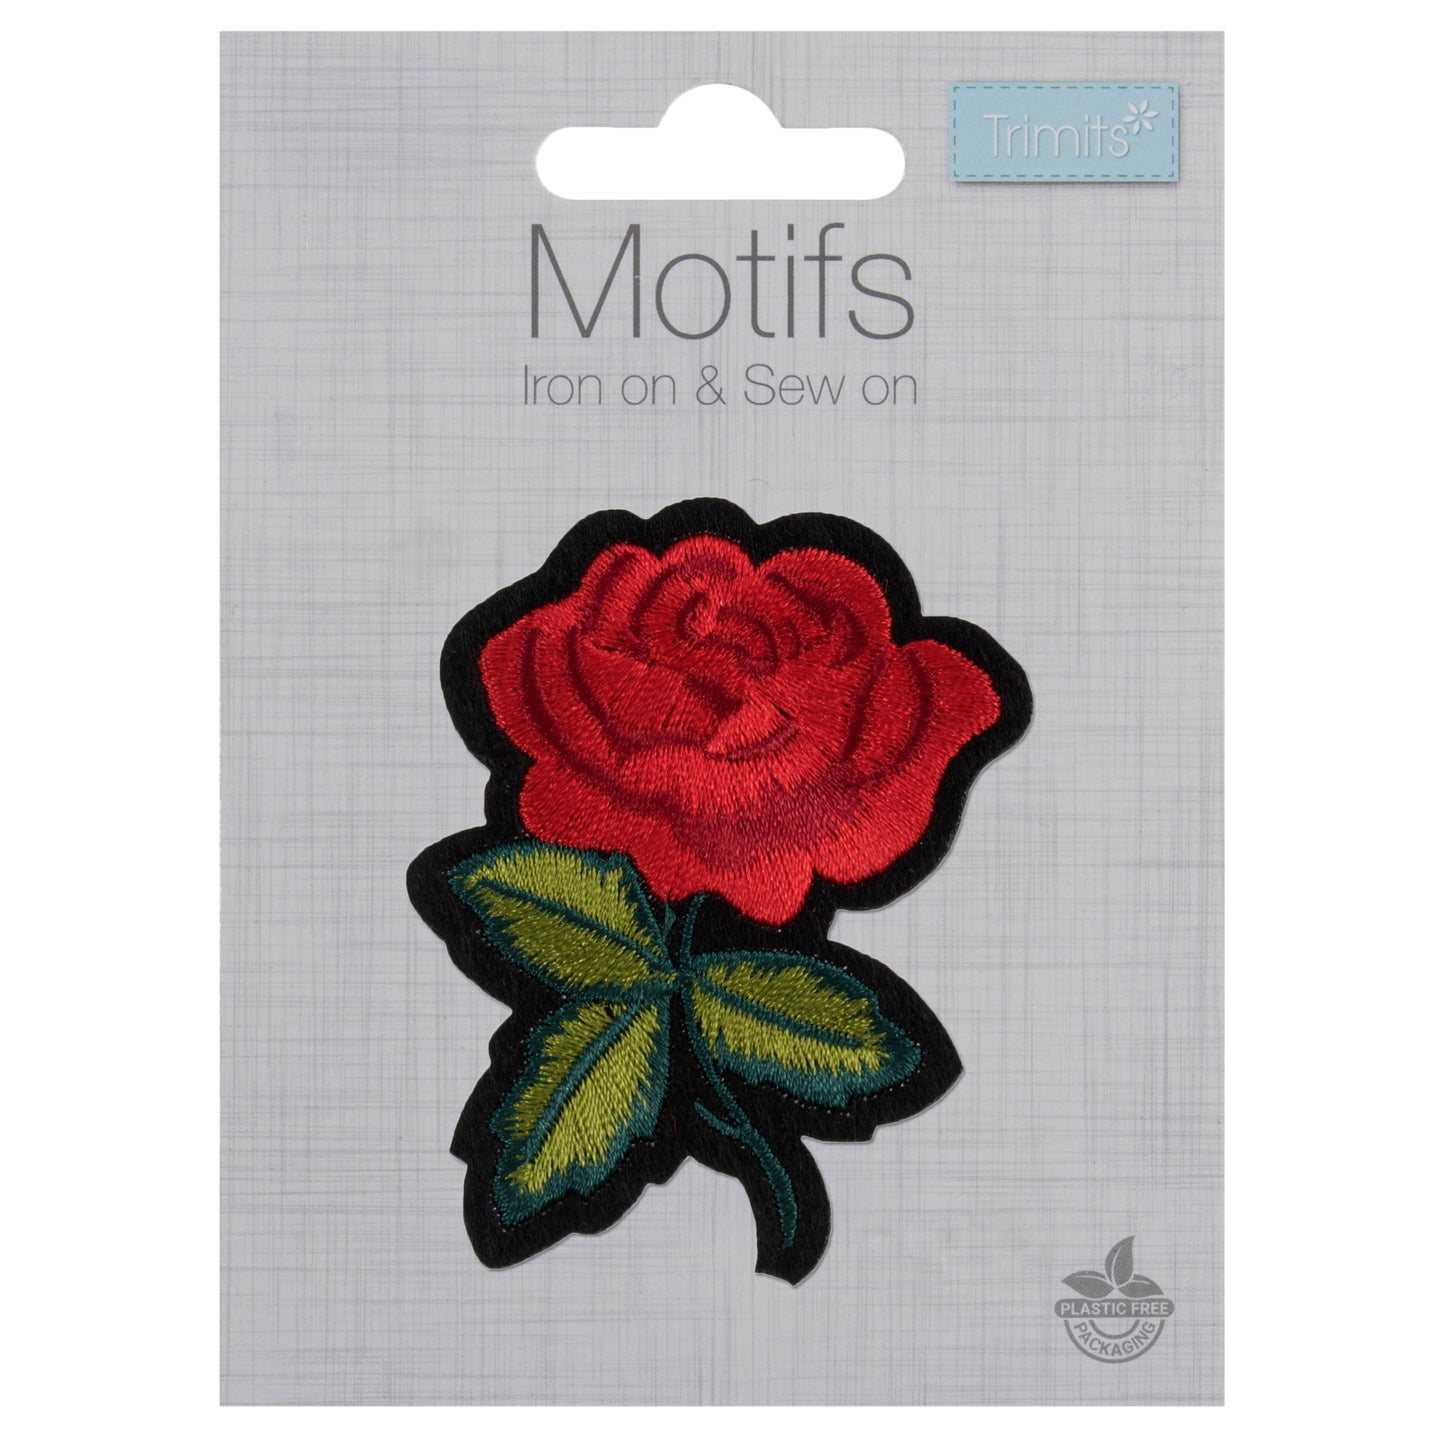 Iron or sew on Motifs-Roses